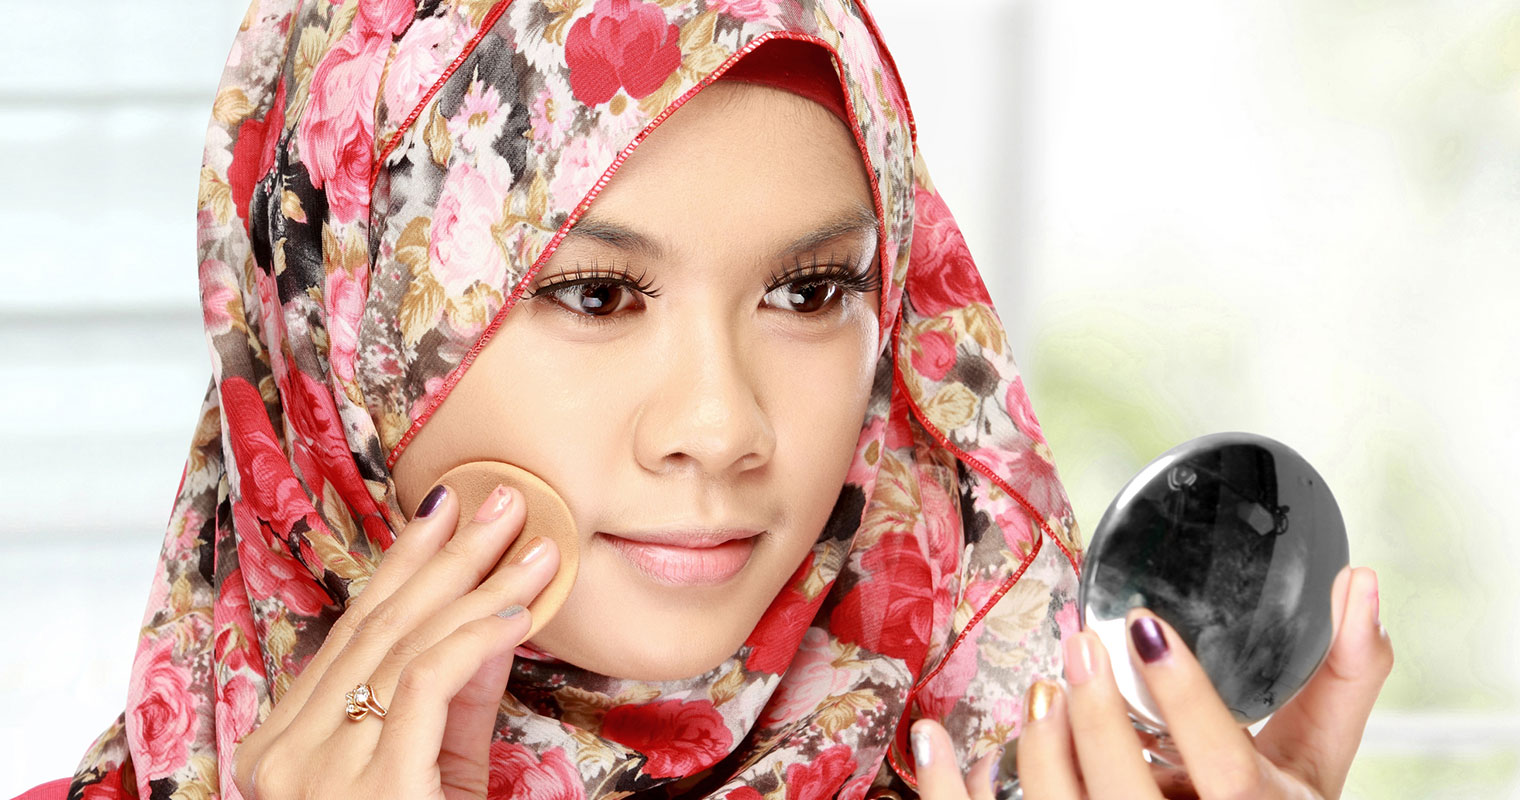 Muslim women value beauty, but they also respect modesty, values, and ethics